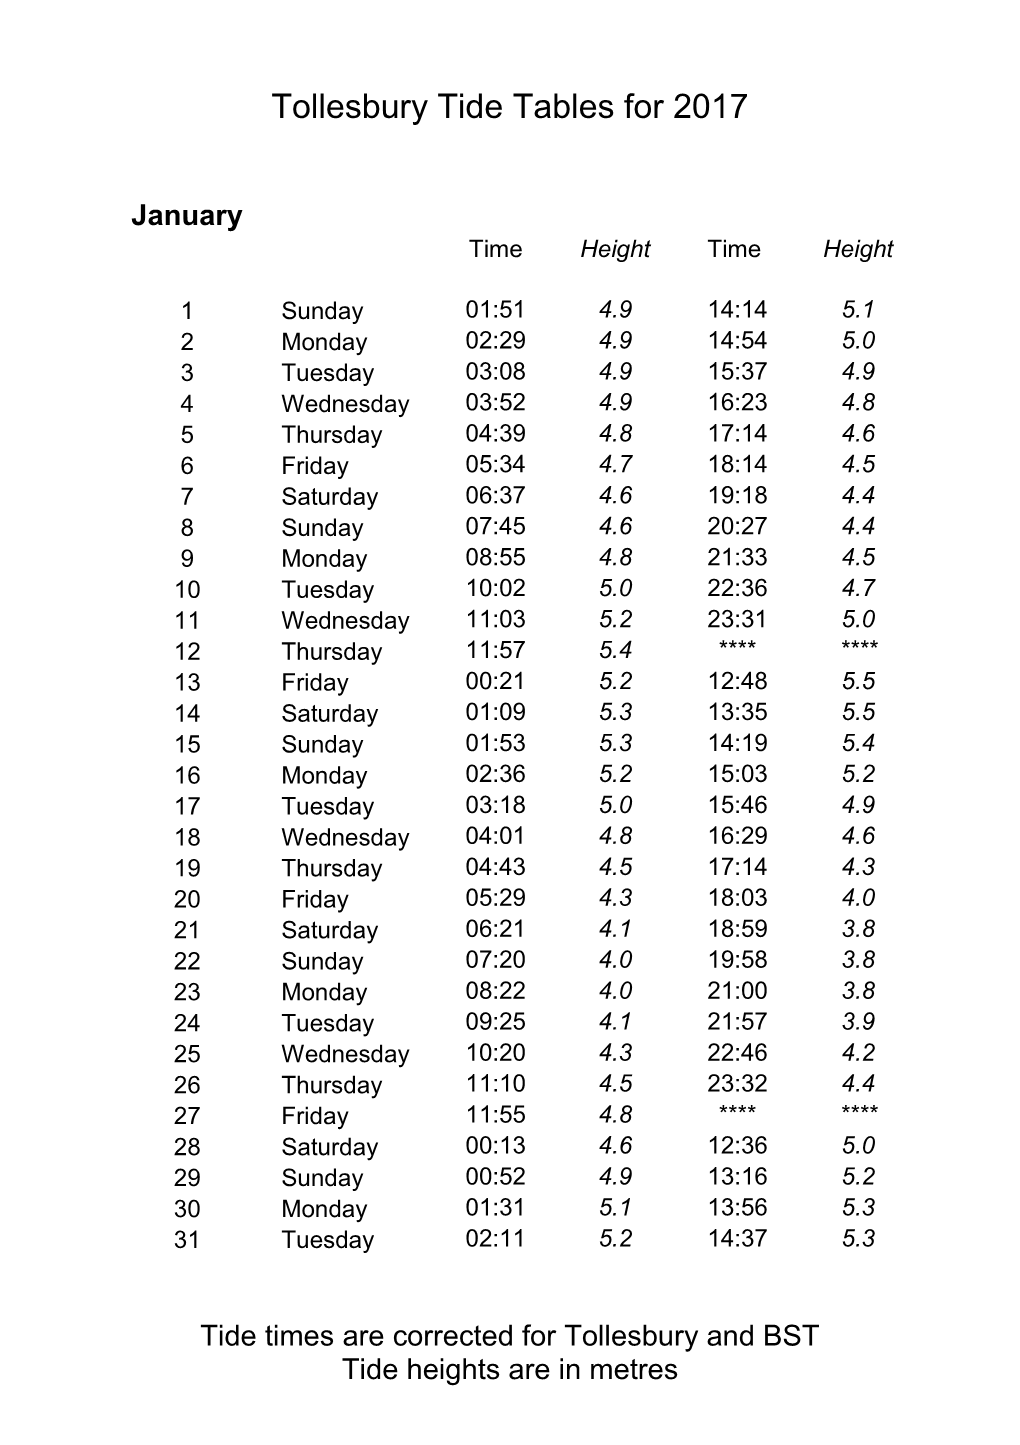 Tide Times Are Corrected for Tollesbury and BST